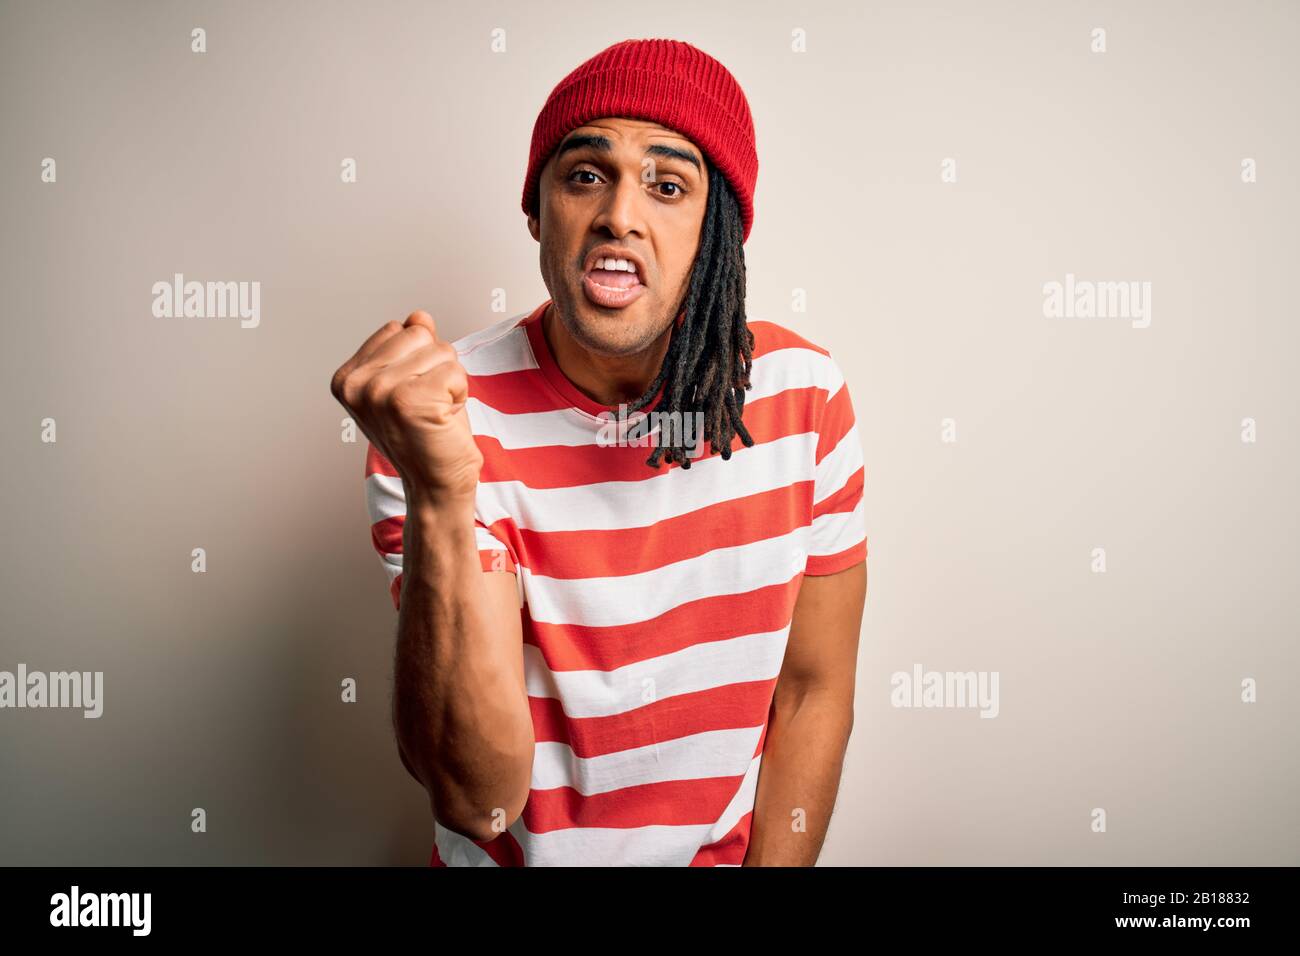 Young handsome african american man with dreadlocks wearing striped t-shirt and wool hat angry and mad raising fist frustrated and furious while shout Stock Photo